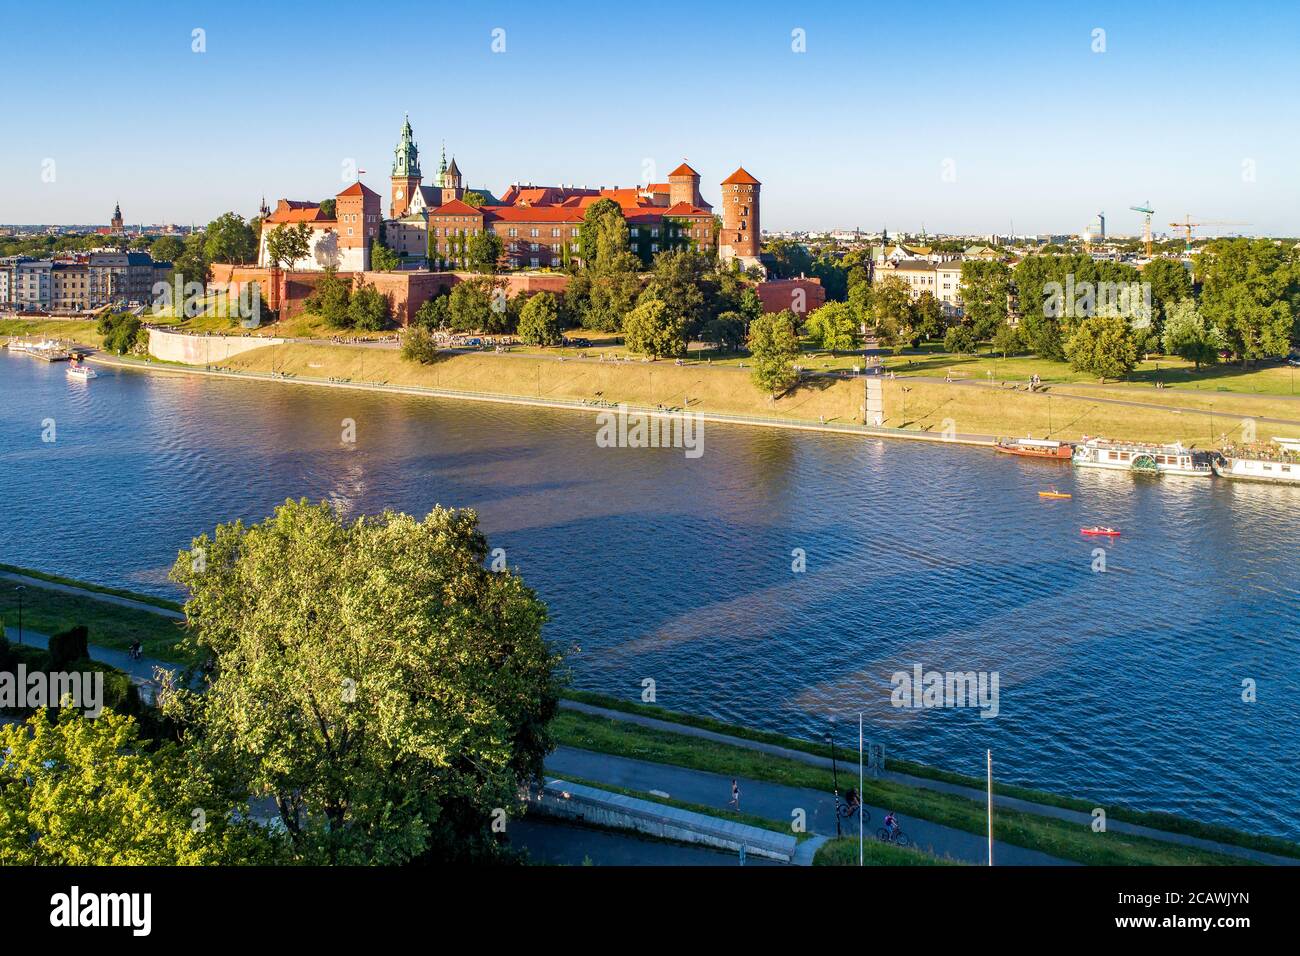 Royal Wawel Cathedral and castle in Krakow, Poland. Aerial view in sunset light. Vistula River, tourist boats, canoes, riverbanks with trees, parks, p Stock Photo